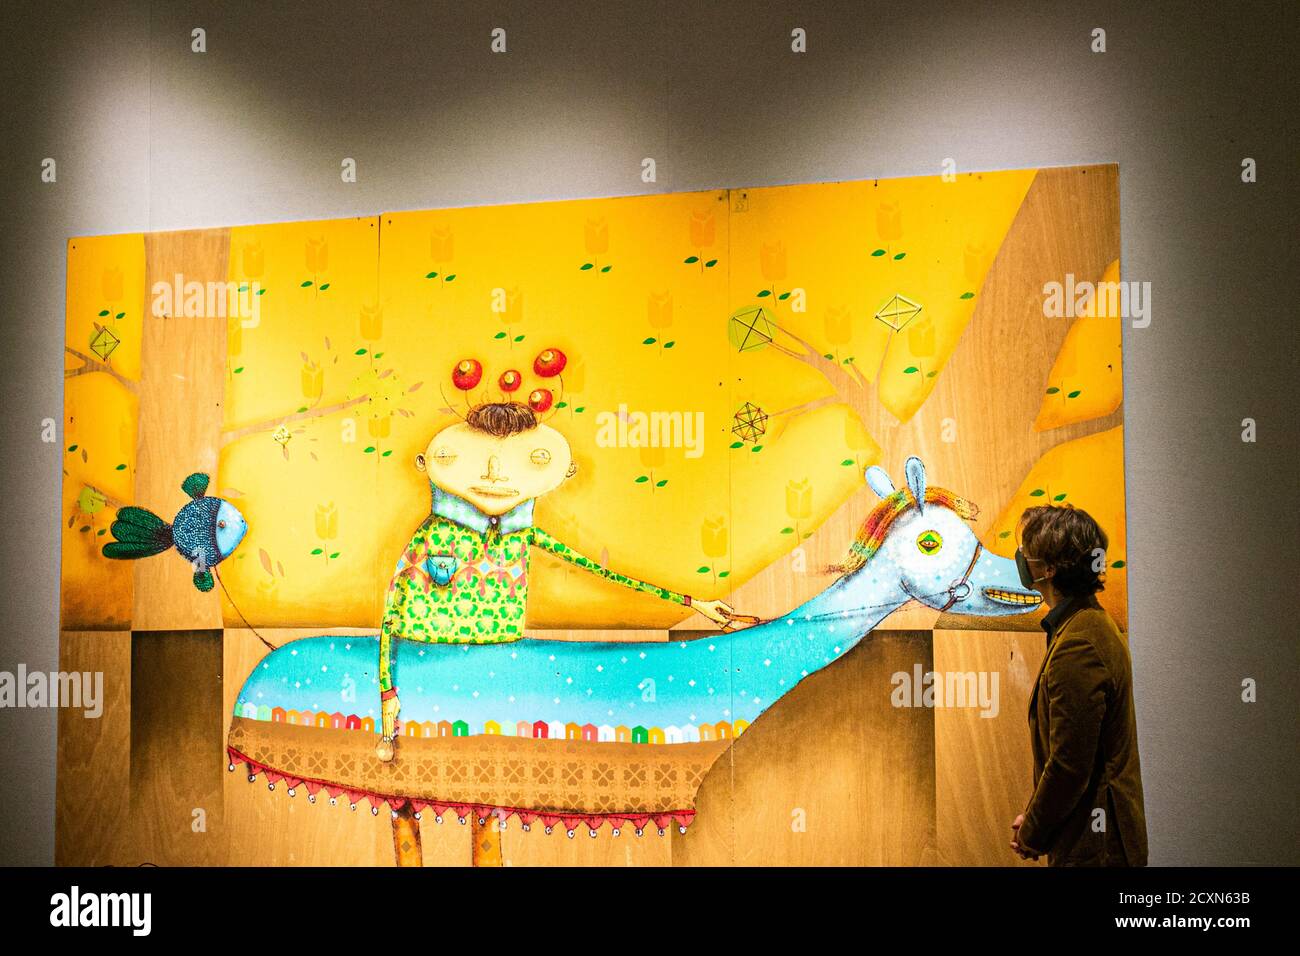 BONHAMS LONDON,UK 1 October 2020. OSGEMEOS (Brazilian, born 1974) Horse (Caballo Marino) in three parts, 2008. Estimate: £ 80,000 - 120,000. Press preview Bonhams new sale explores Pop, Street Art and the related art forms that swept across the world, influencing fashion, music, and youth culture. Credit: amer ghazzal/Alamy Live News Stock Photo